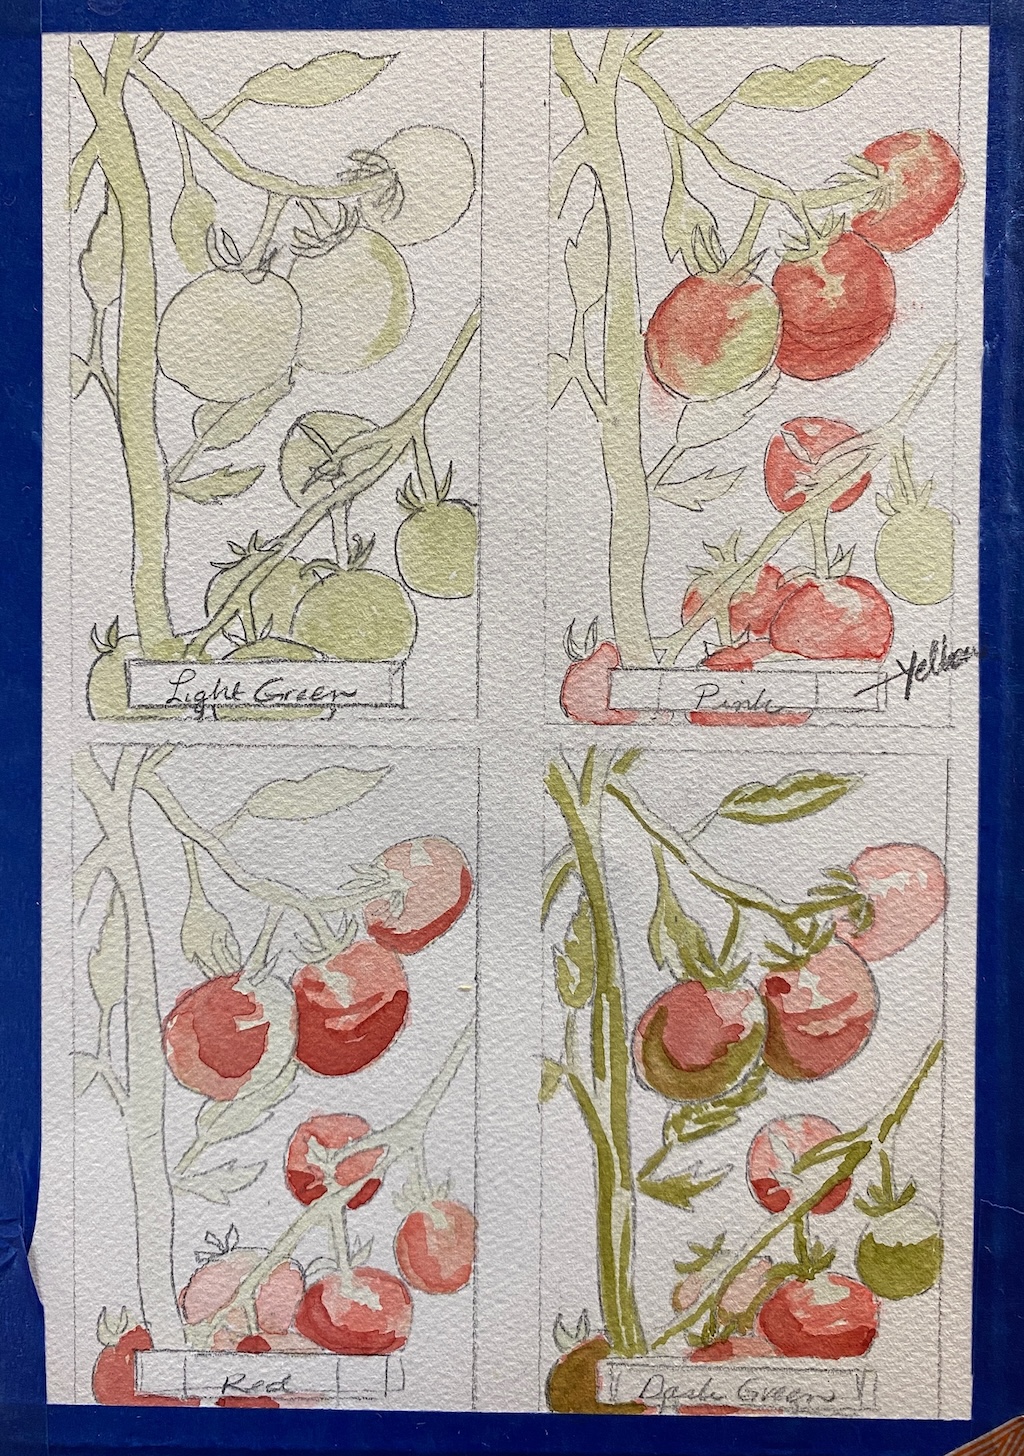 Watercolour sketch showing the same image four ways, with additional colours added in each step.